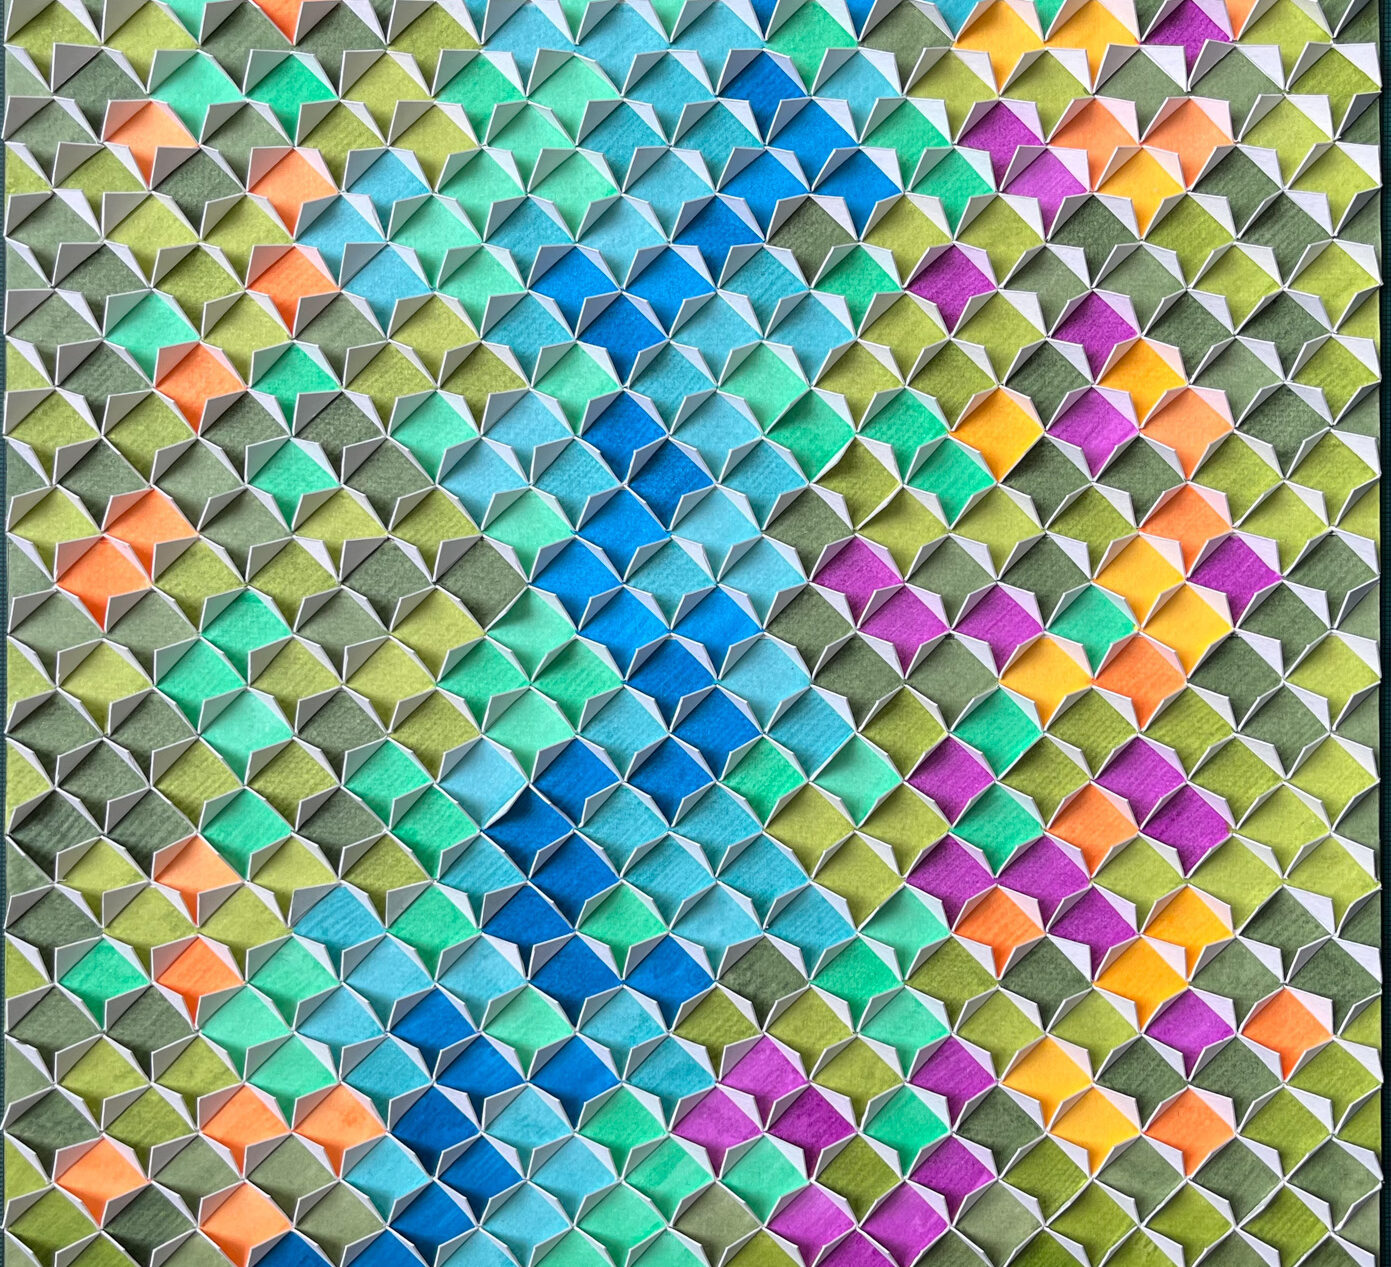 paper artwork consisting of painted paper squares in a grey, orange, blue, pink, and green pattern